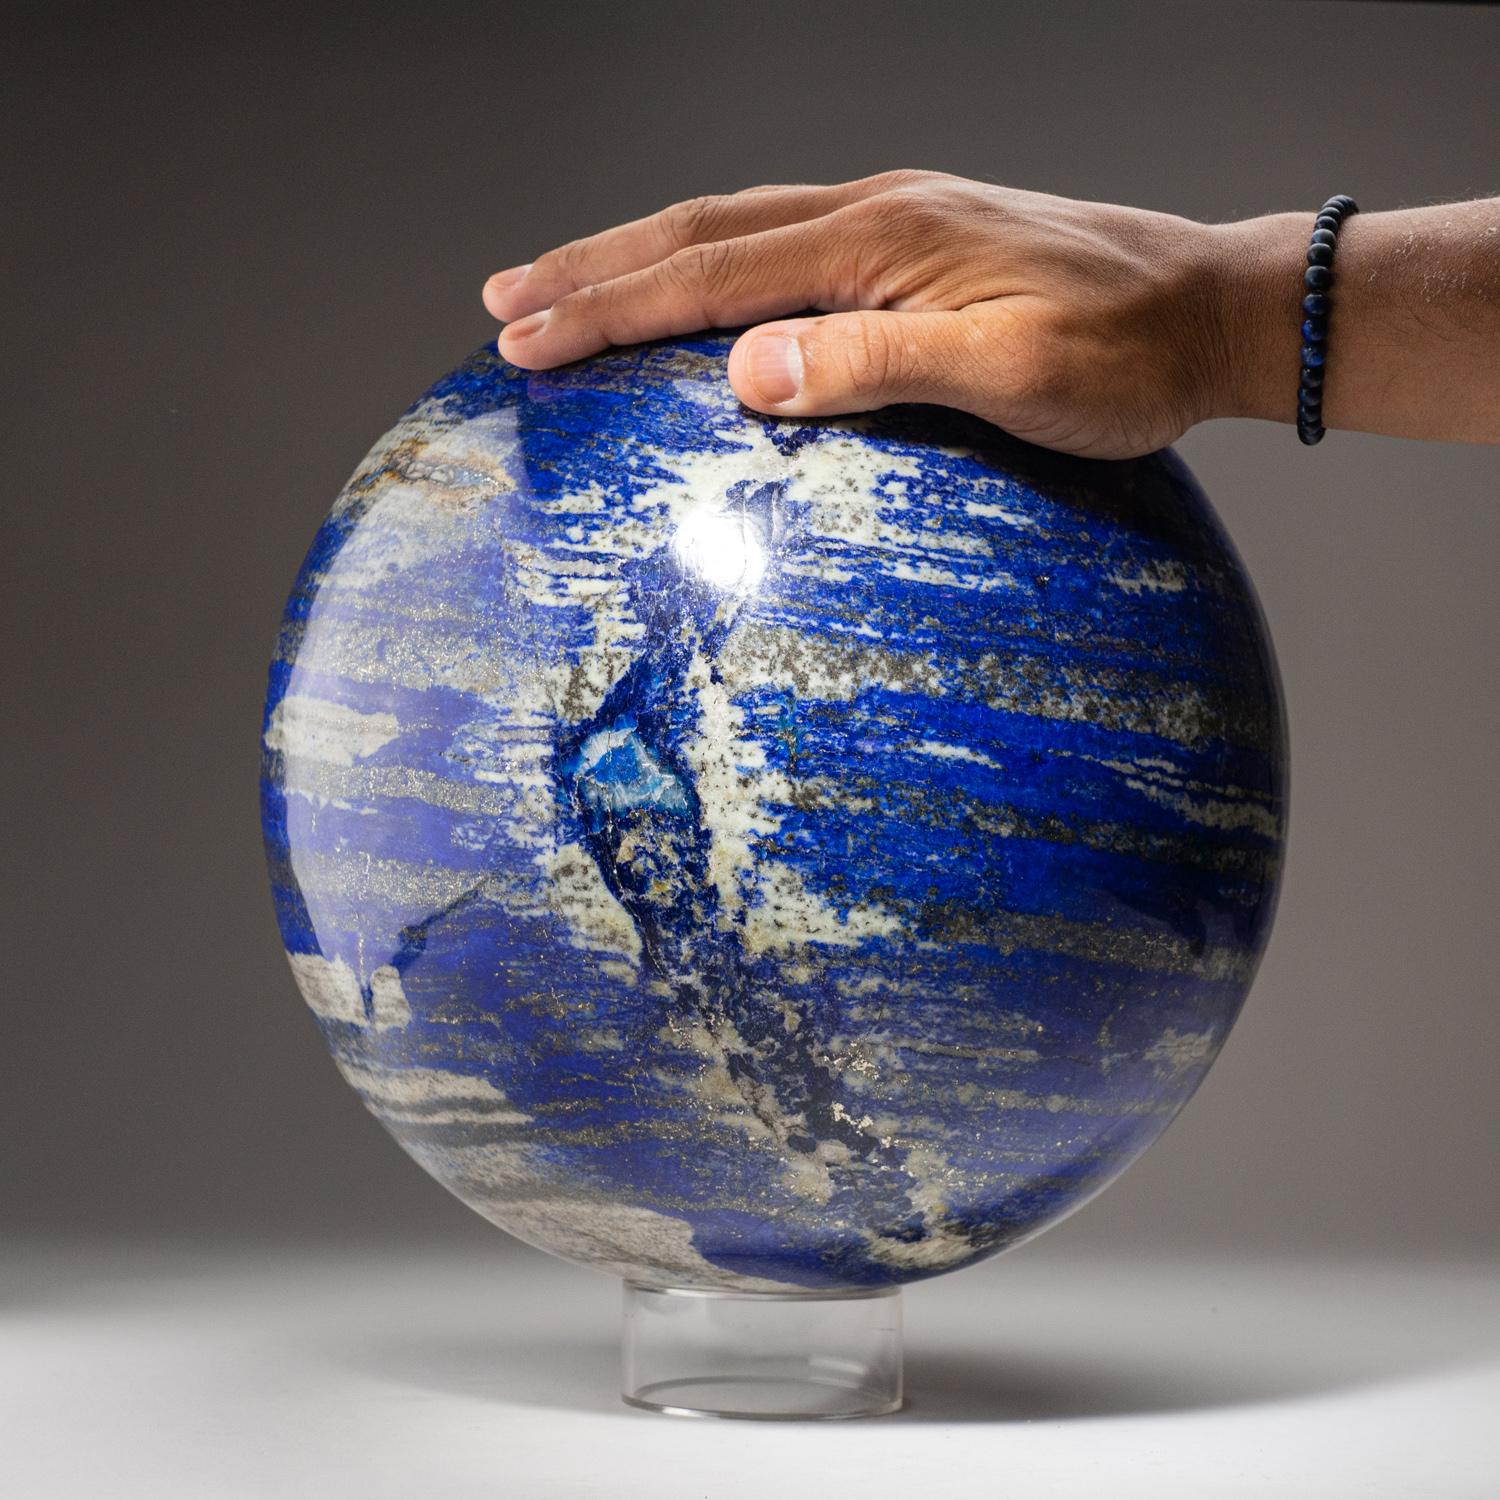 Museum quality, giant hand-polished natural Lapis Lazuli sphere from Afghanistan.  This specimen has rich, electric-royal blue color enriched with scintillating pyrite microcrystals.

Lapis Lazuli is a powerful crystal for activating the higher mind